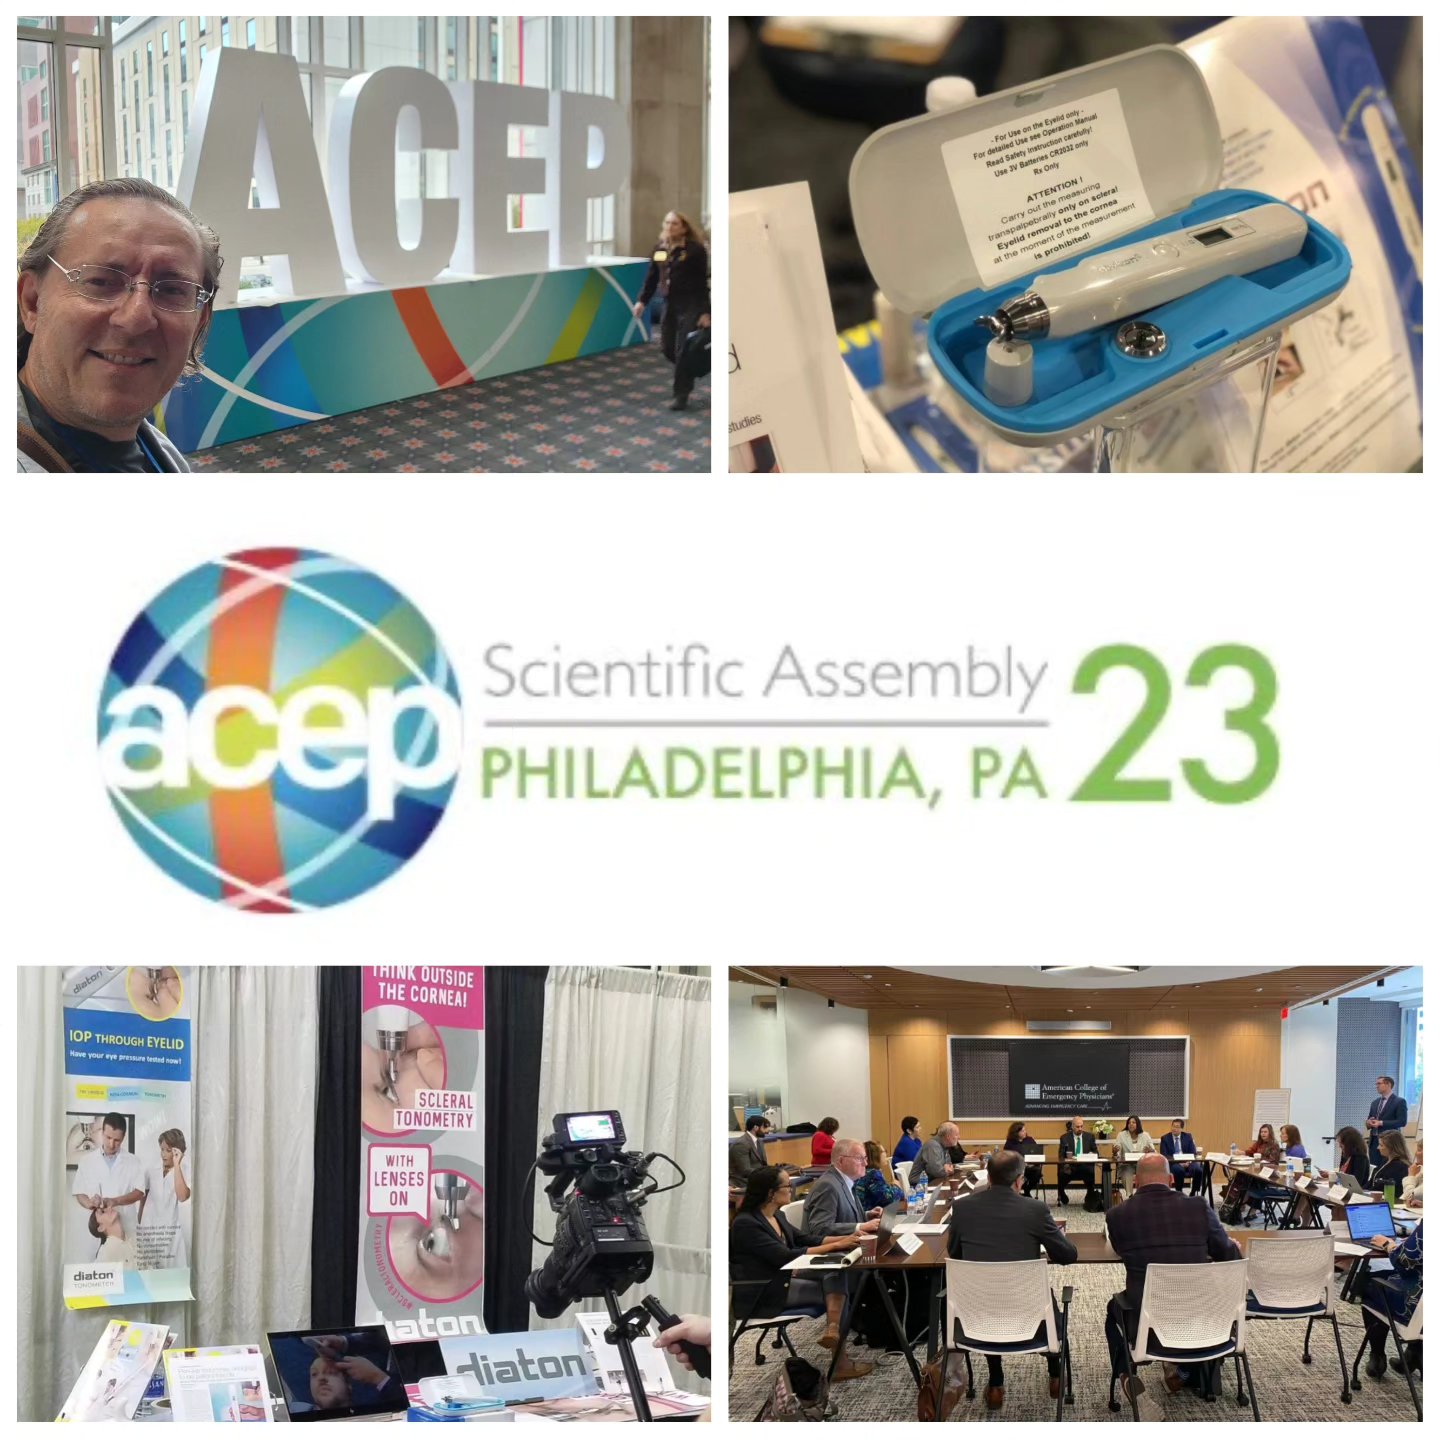 A Leap Forward in Eye Care: Diaton Tonometer’s Benefits in Hospital and Emergency Scenarios Presented at ACEP Scientific Assembly